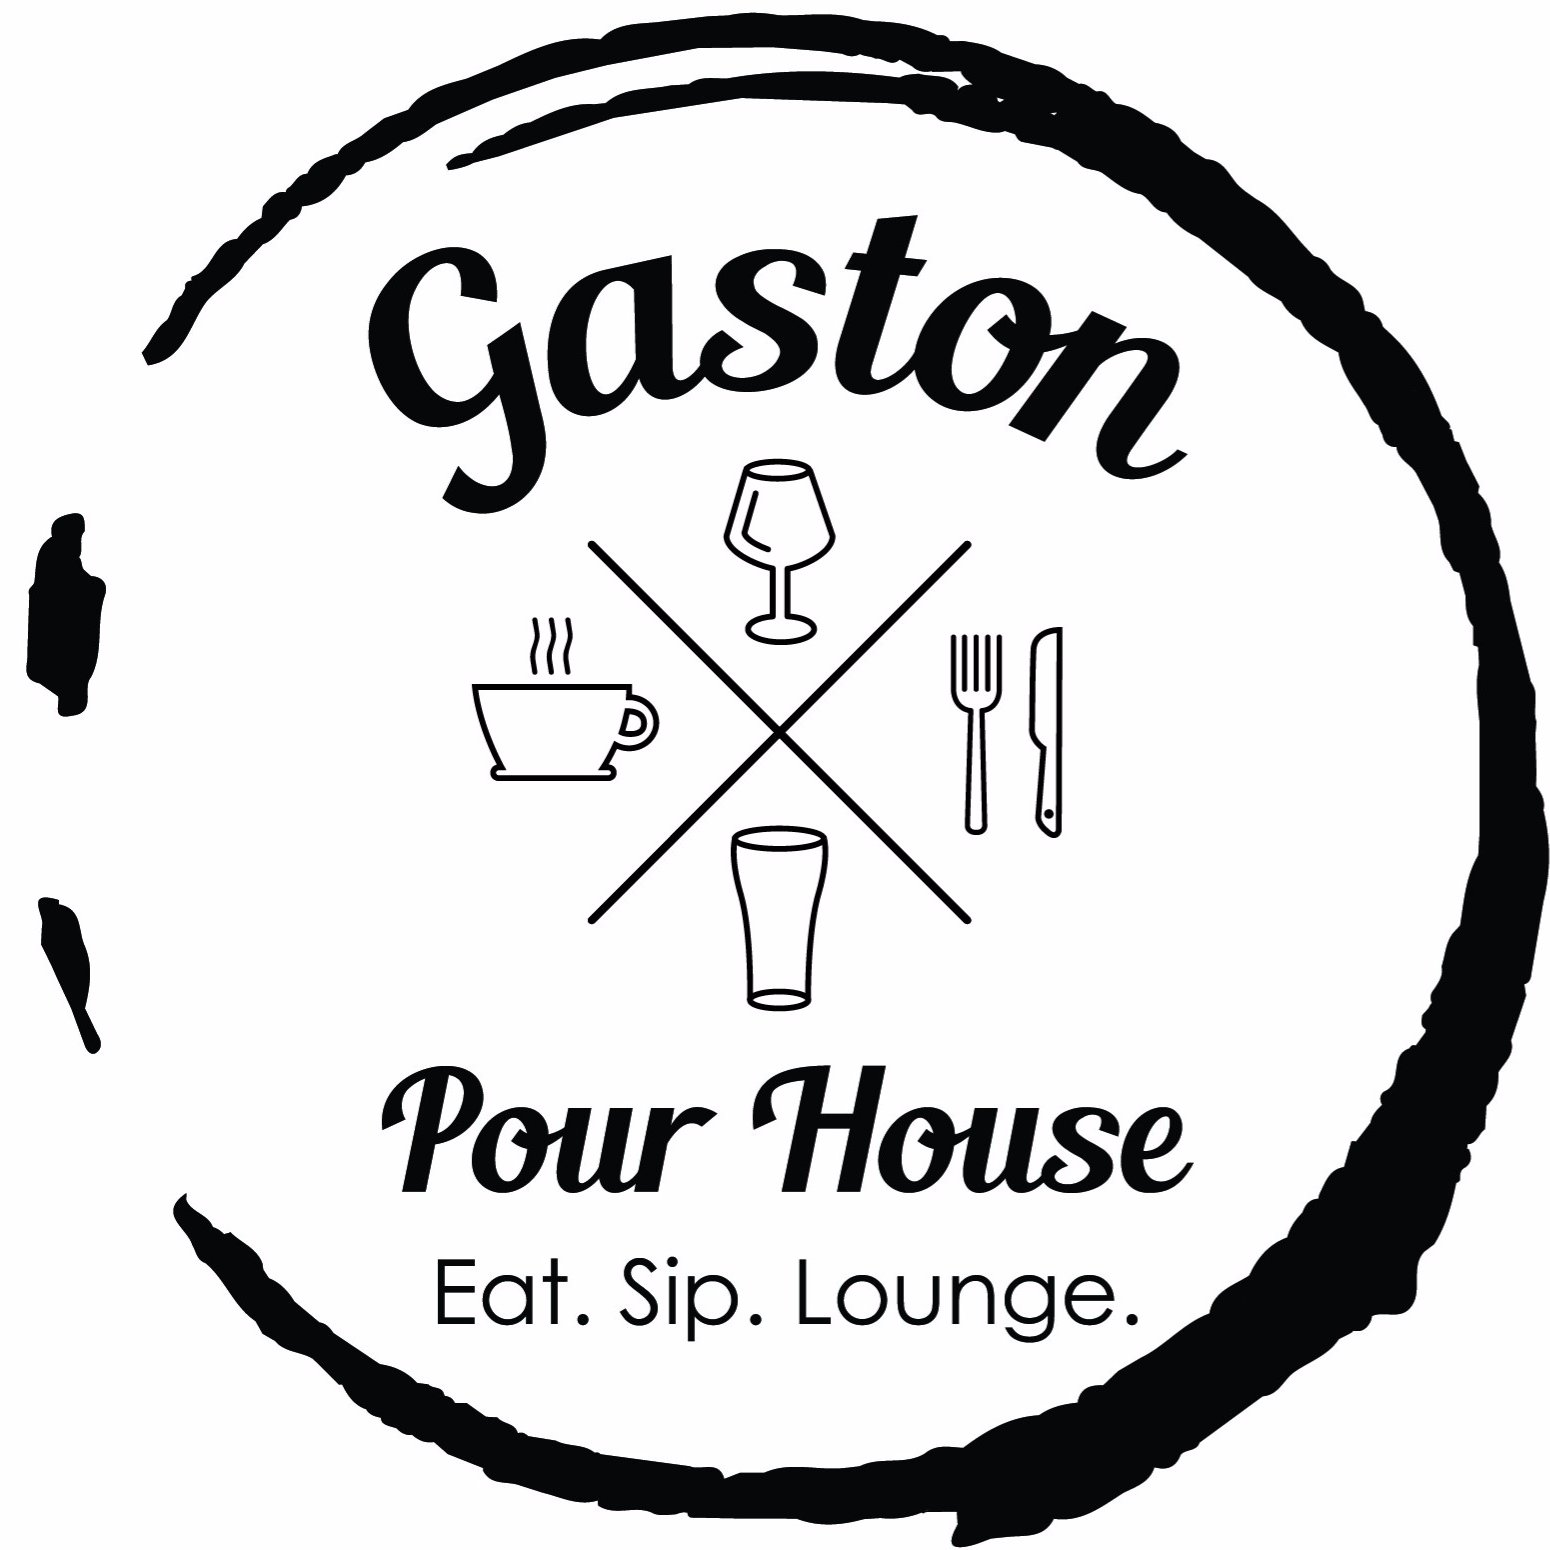 Gaston Pour House will be COMING SOON to Gastonia in August! Keep checking in for updates, grand opening details, hiring, and more!